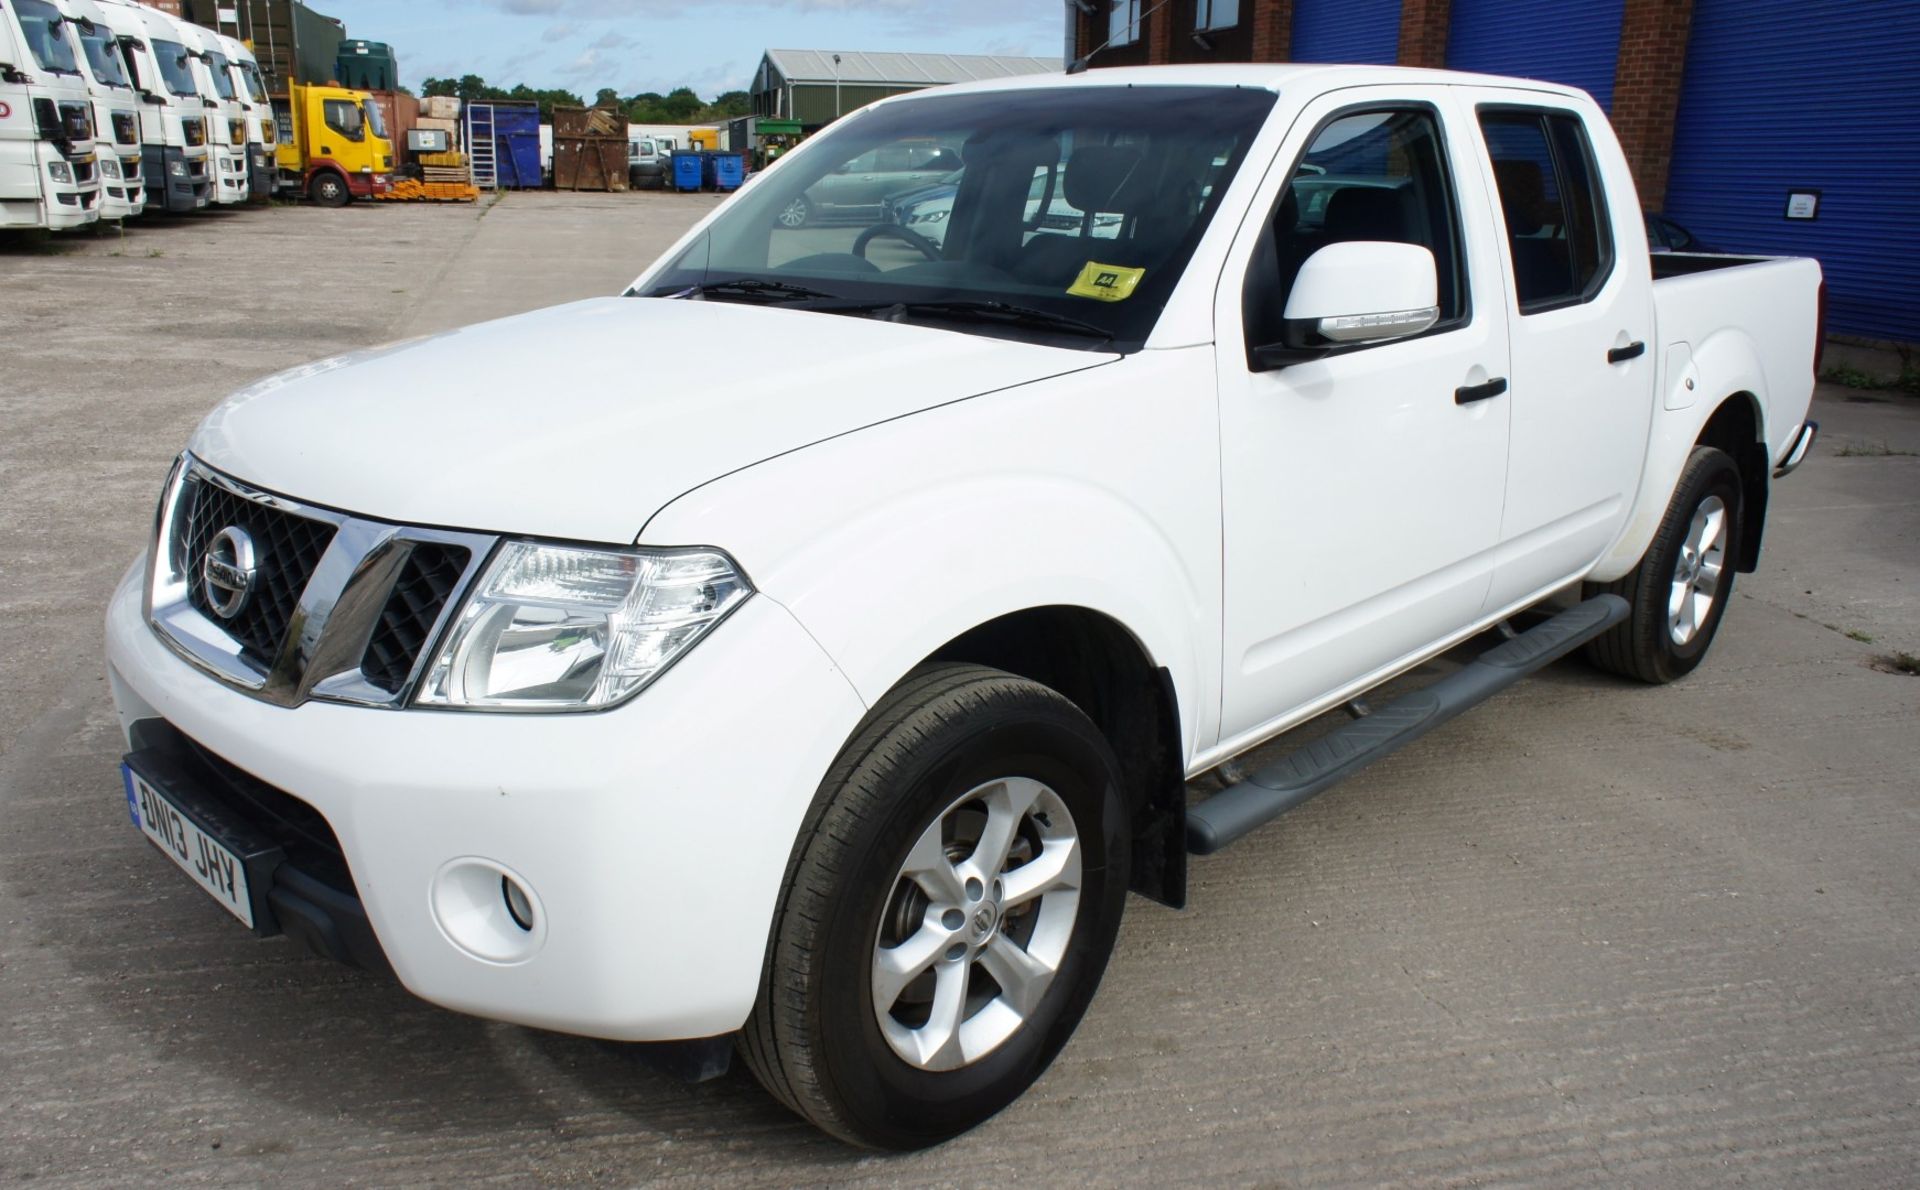 * Nissan Navara Acenta 2.5dCi 190 4WD Double Cab Pick Up, diesel, 2488cc, white, Registration DN13 - Image 3 of 16